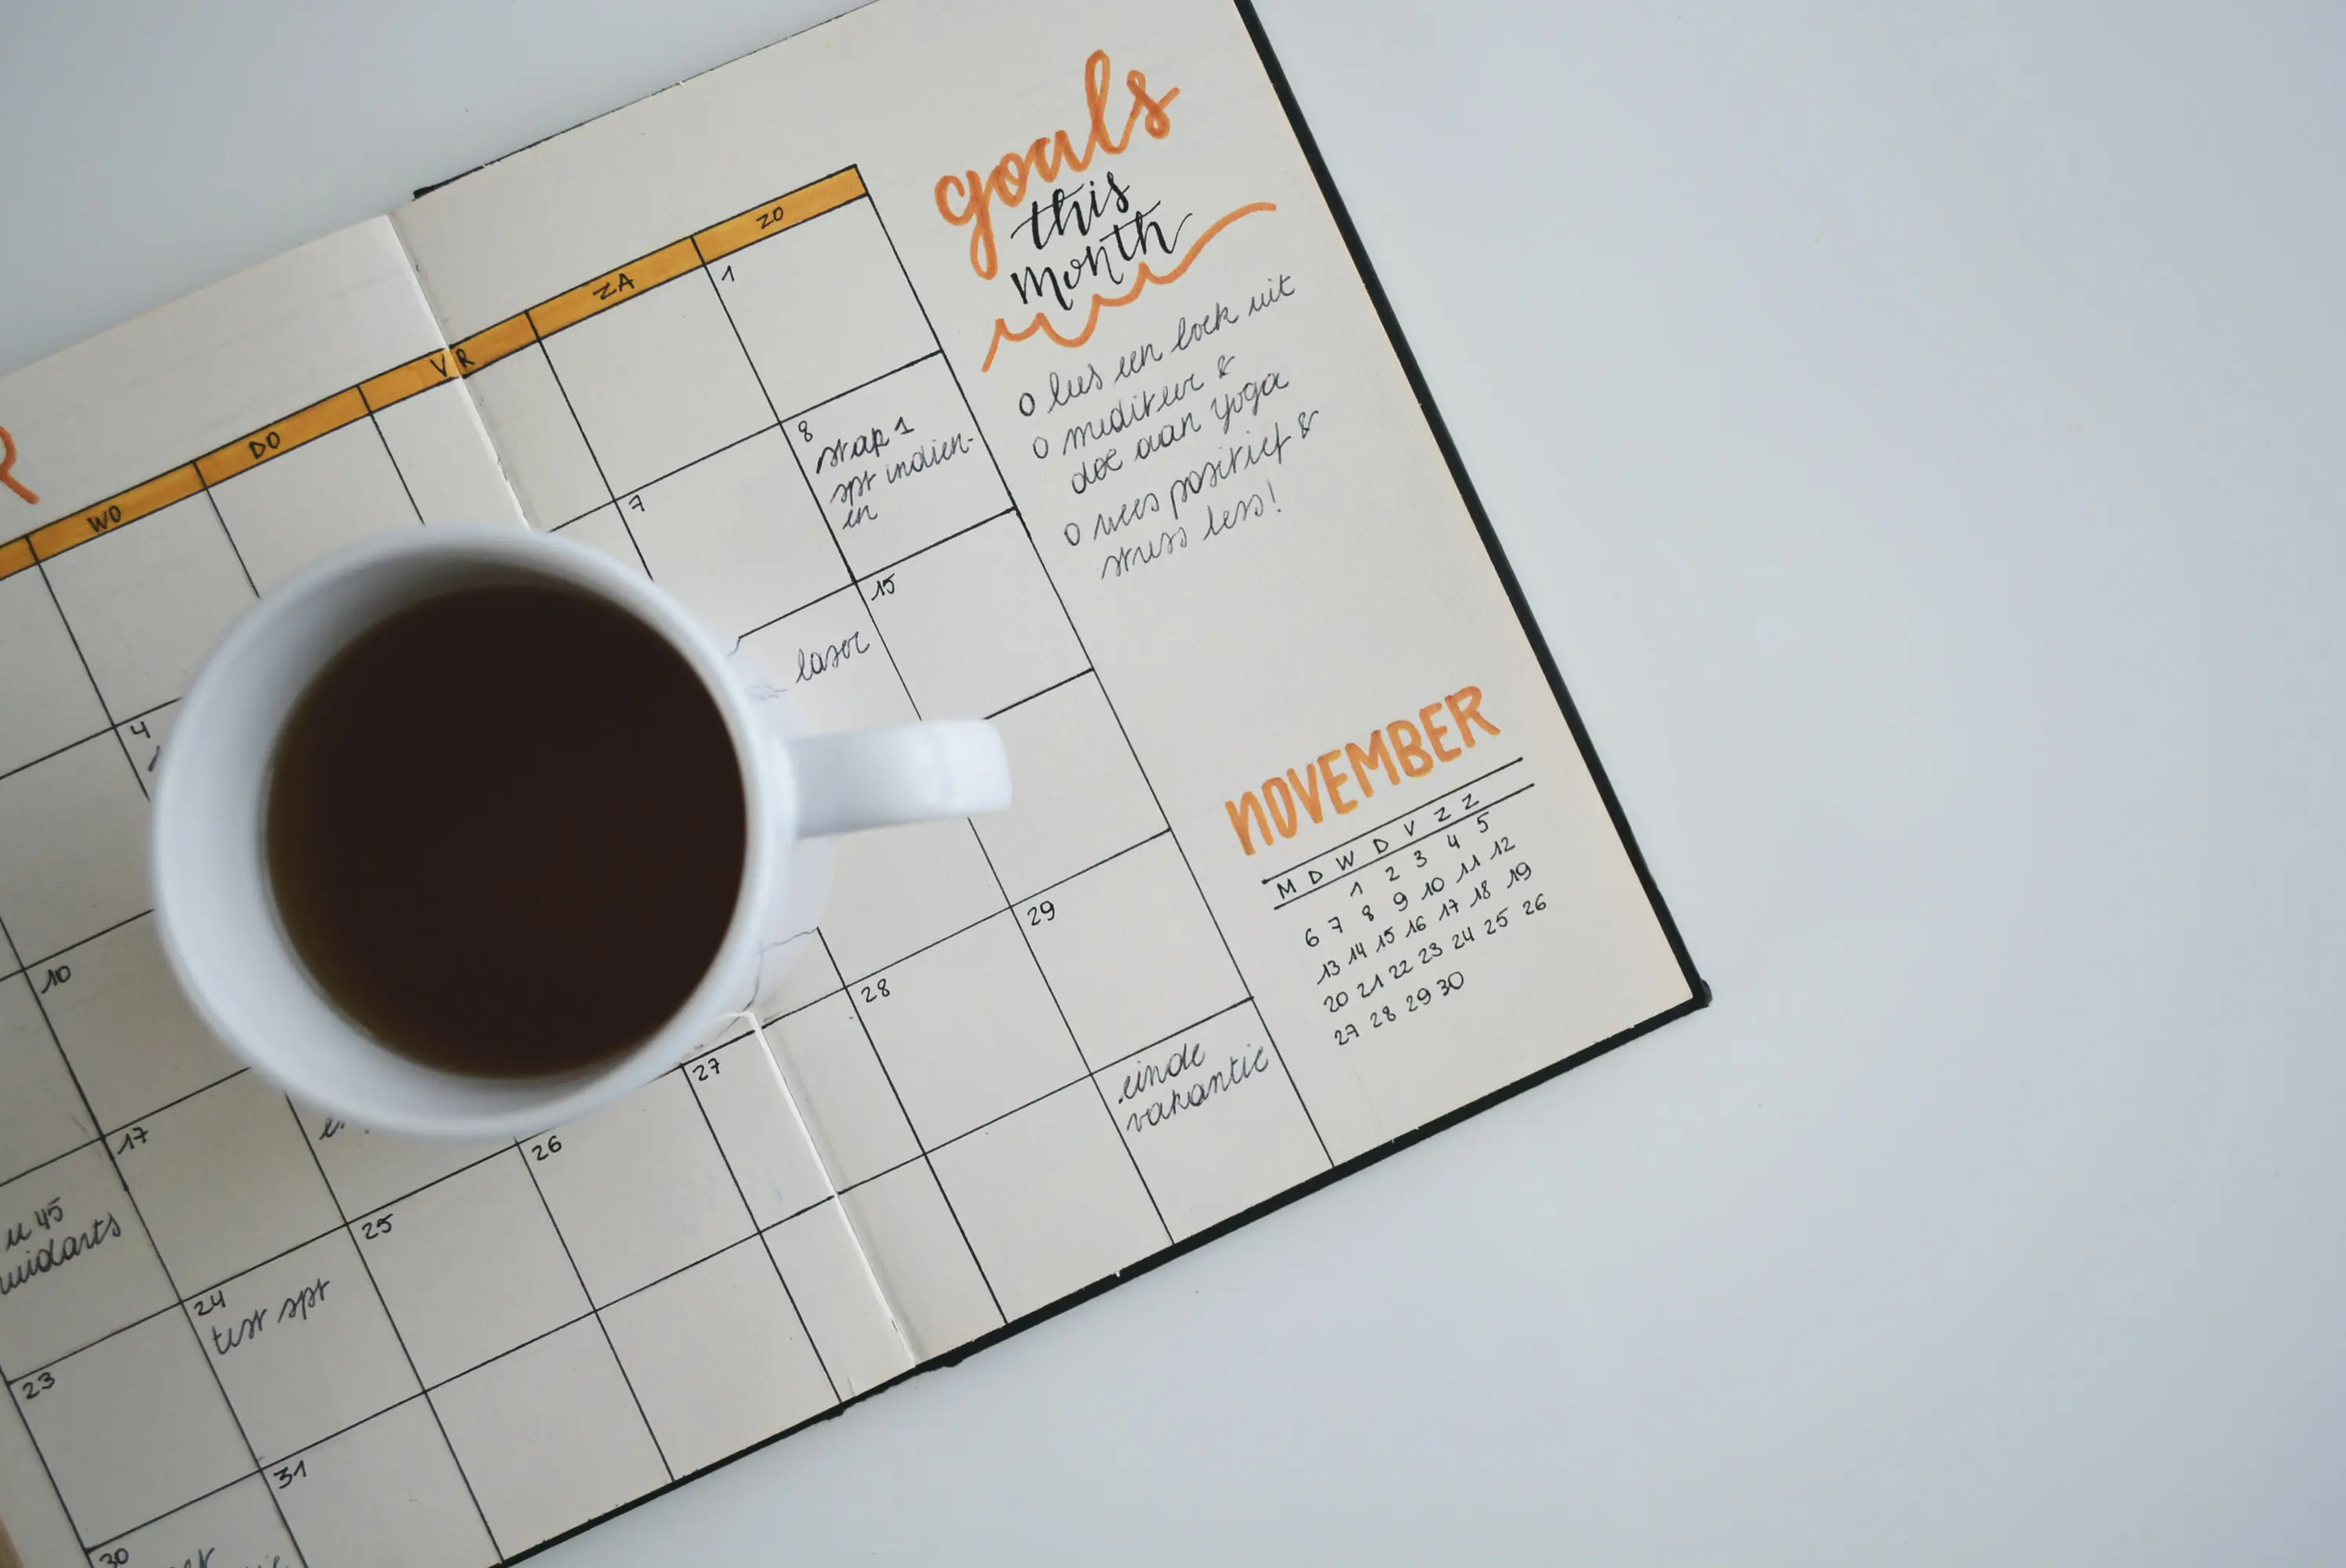 White Ceramic Mug of Coffee on Top of Day Planner